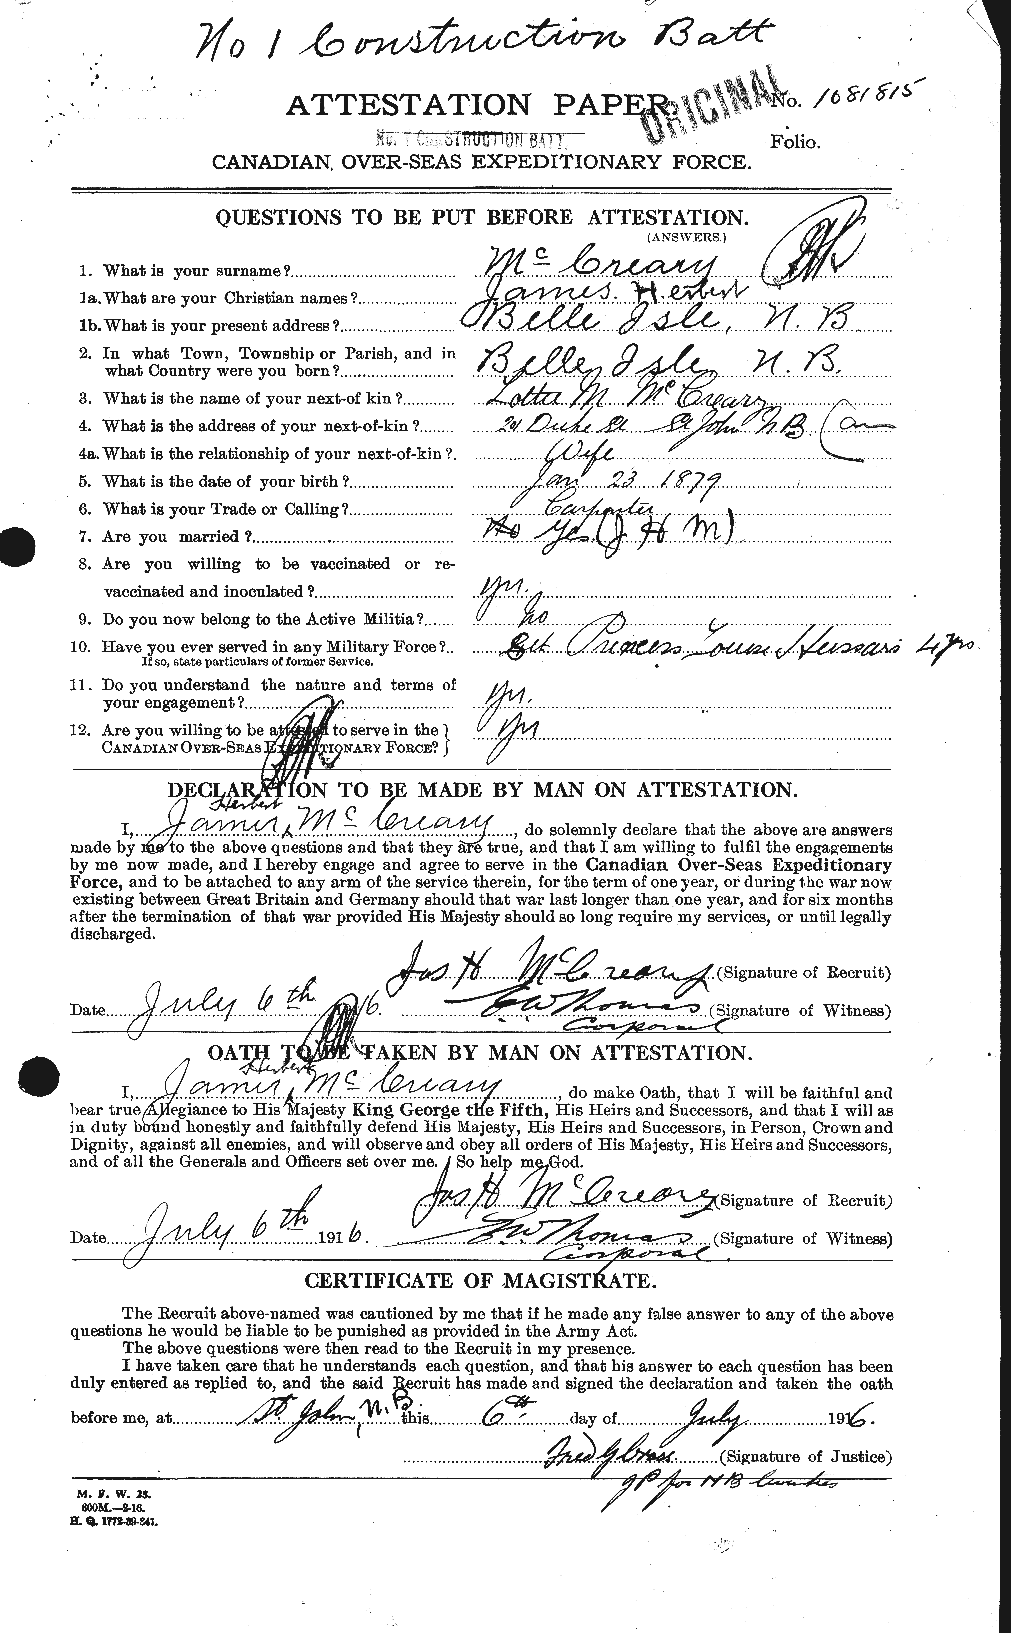 Personnel Records of the First World War - CEF 135997a